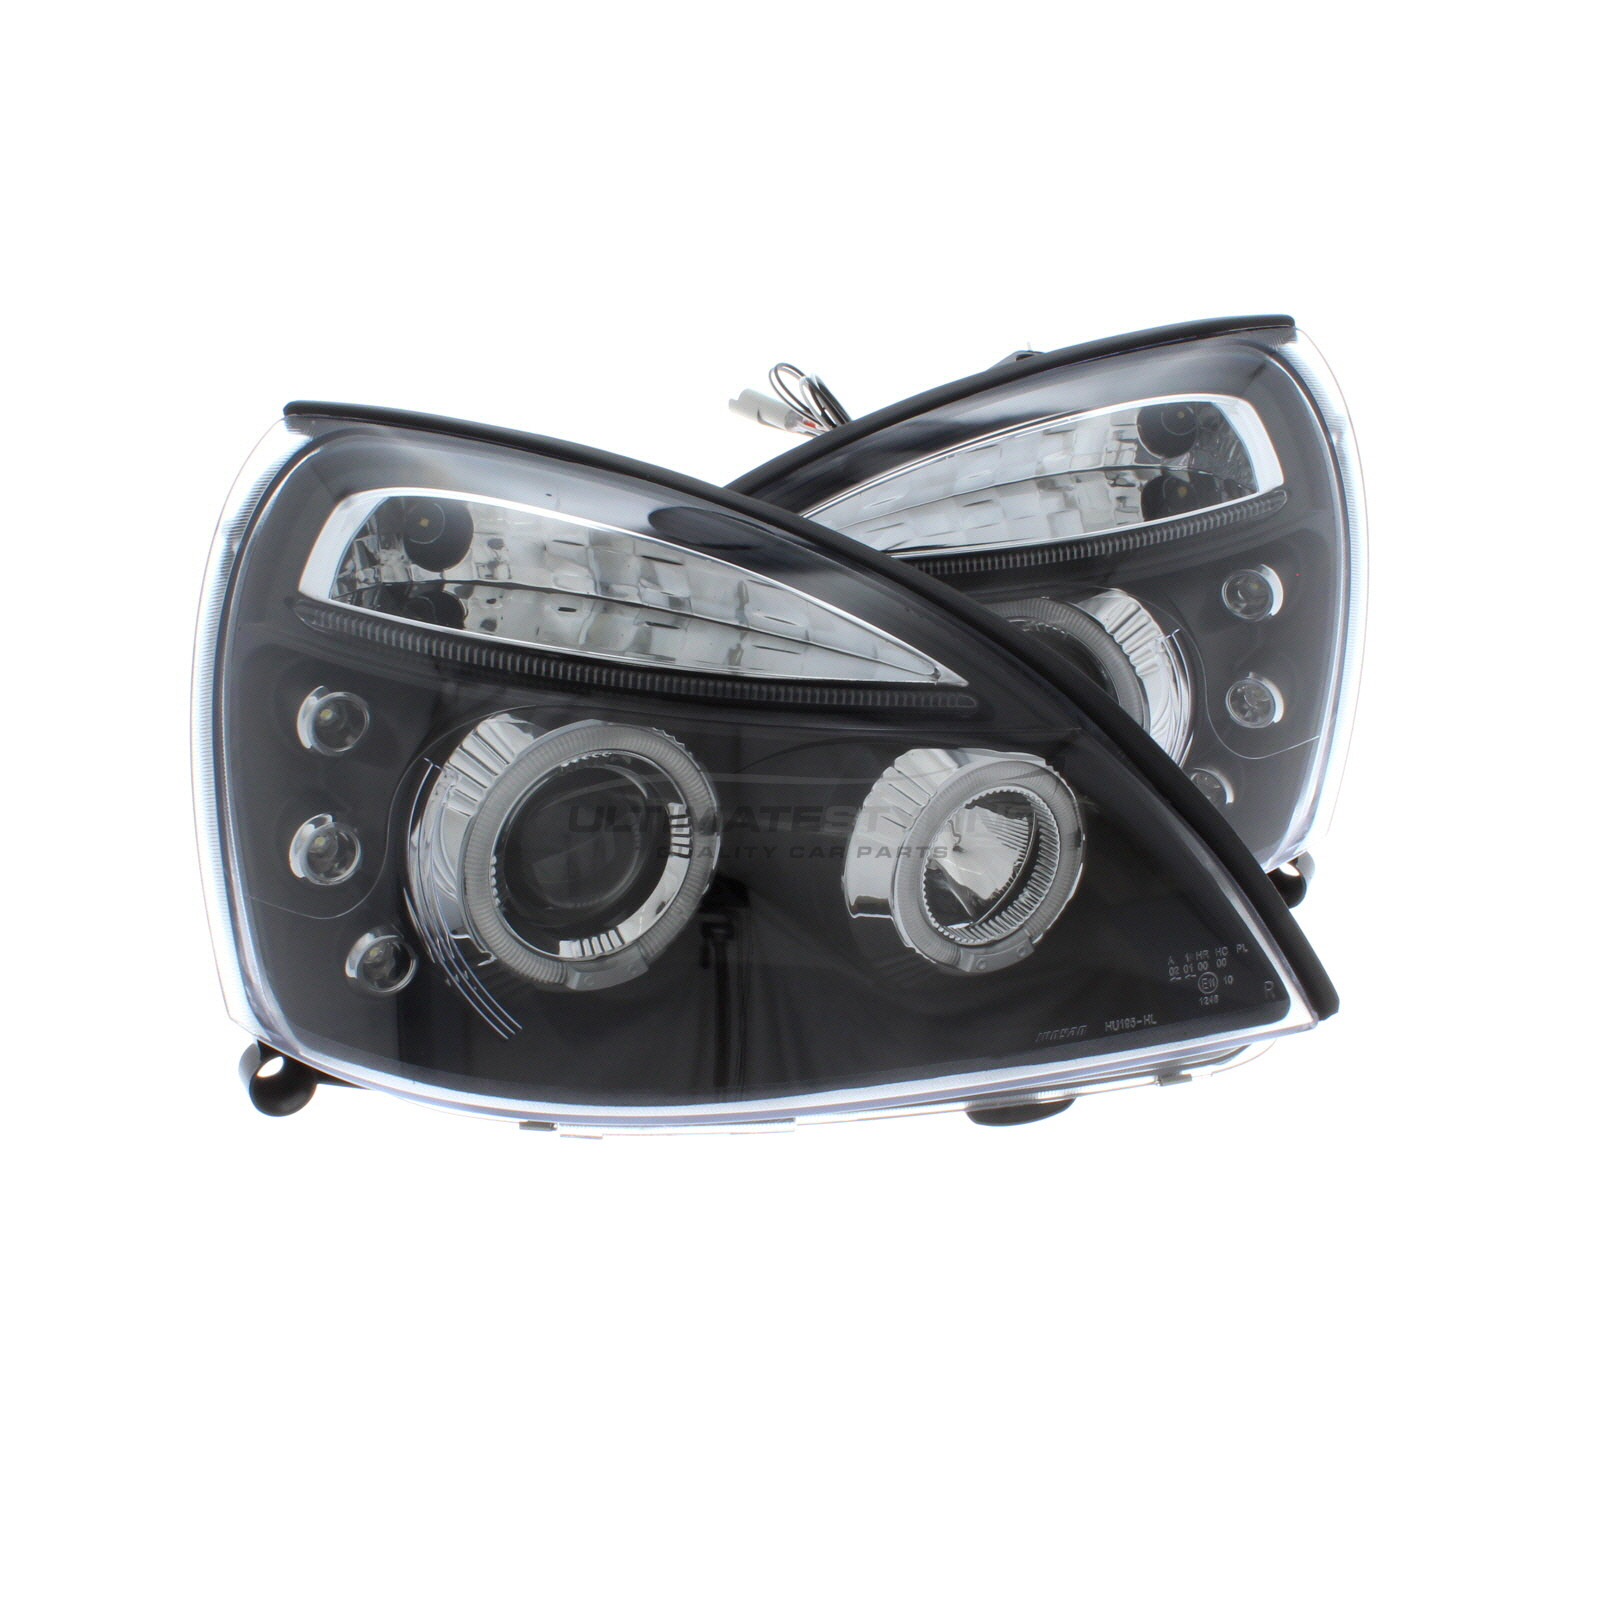 Renault Clio Mk2 2001-2005 Upgrade Headlights Black Inner Twin LED Angel Eyes with DRL Projector Xenon Look